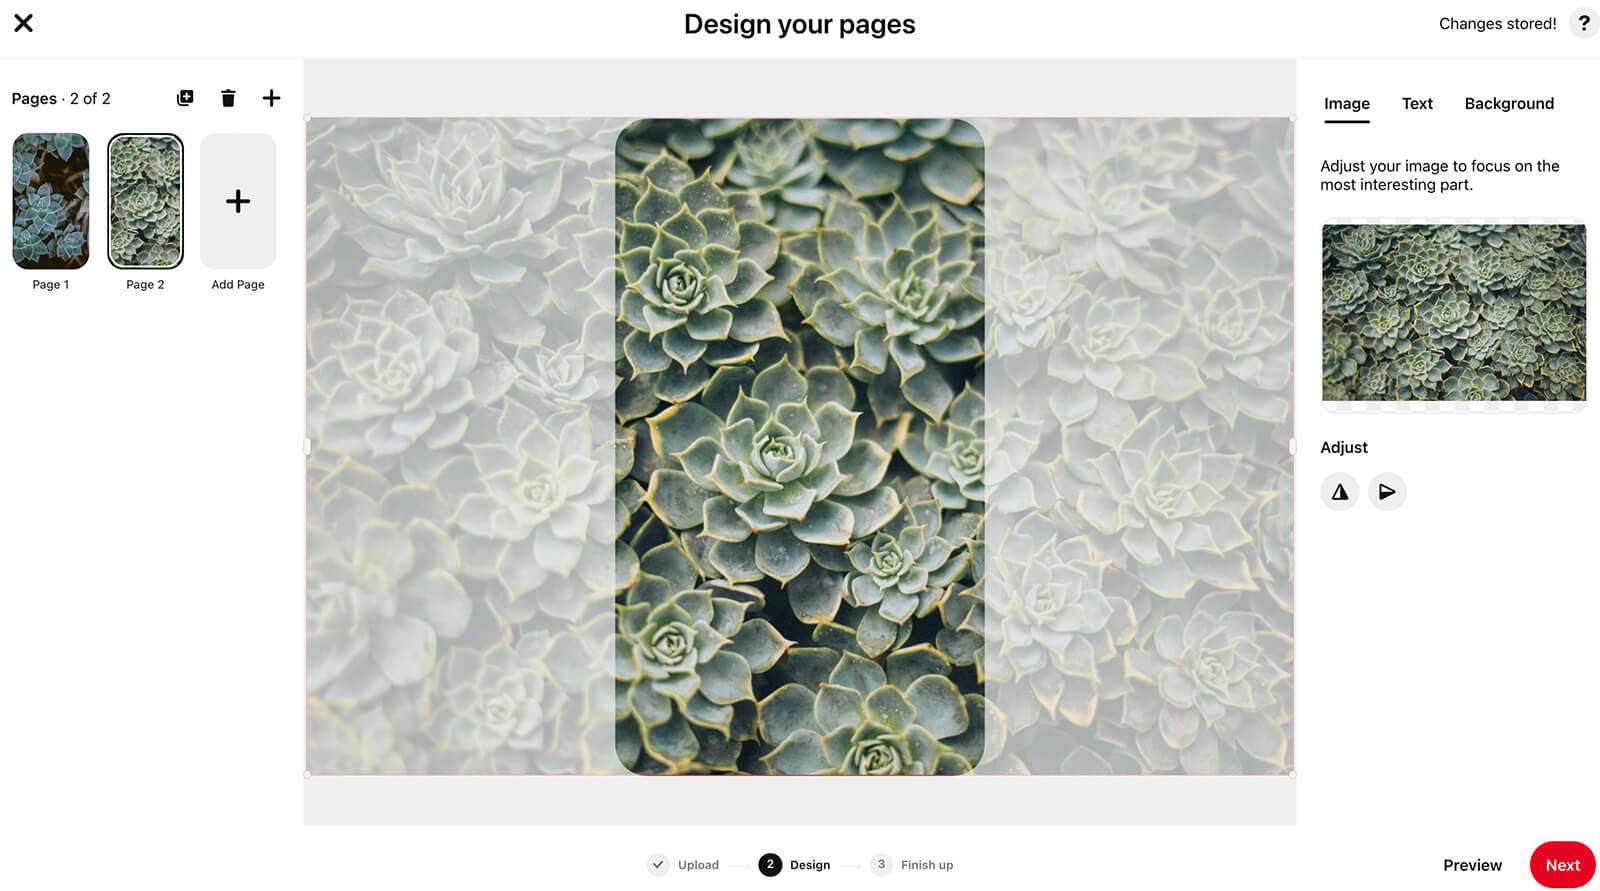 ow-to-optimize-social-media-pinterest-aspect-ratio-image-presets-example-9